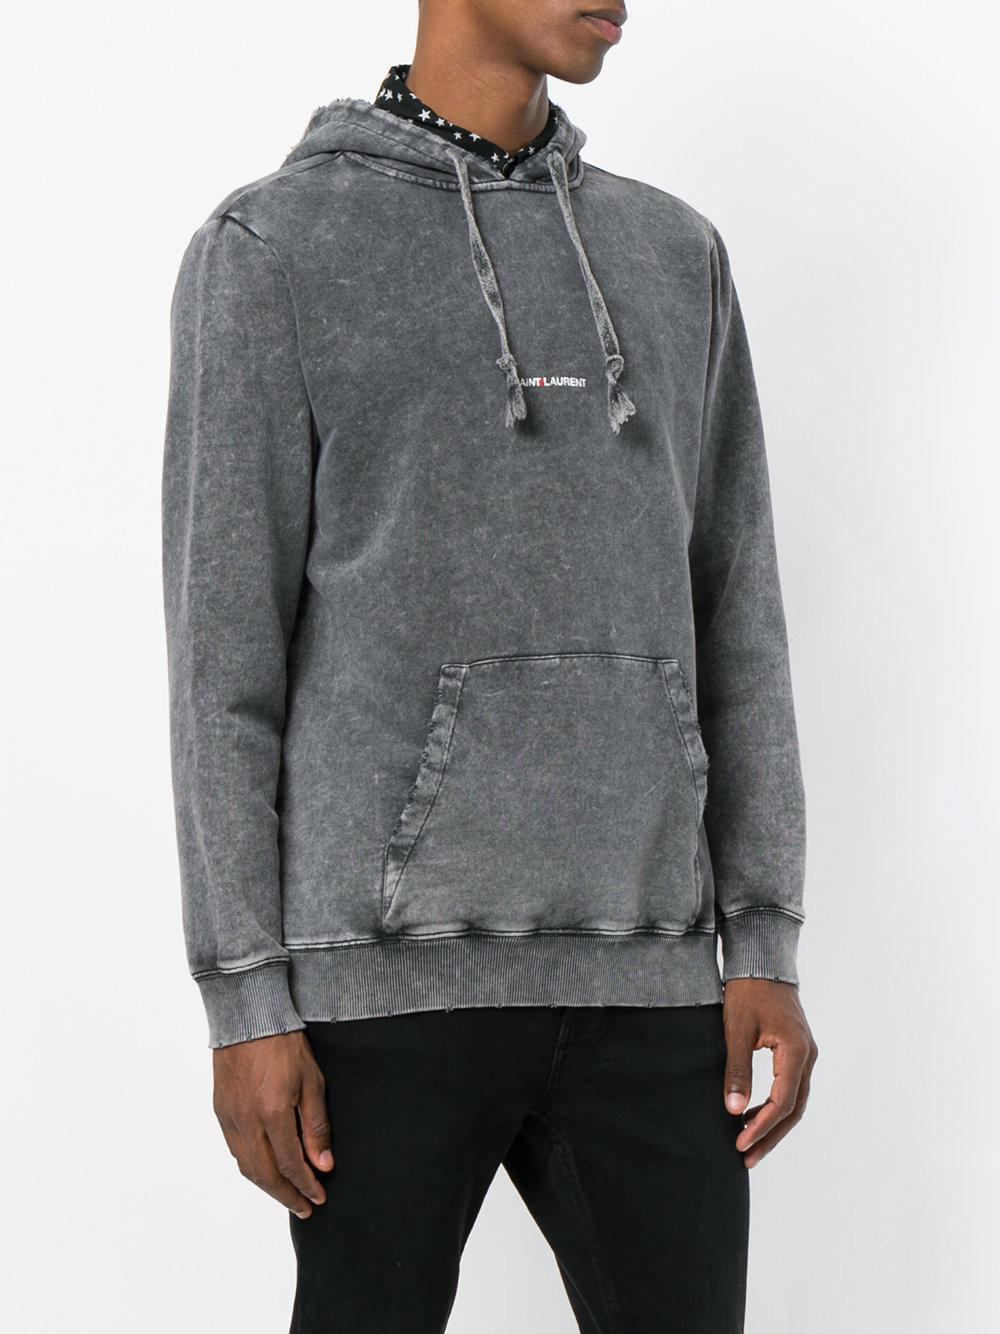 Saint Laurent Cotton Distressed Faded Hoodie in Grey (Gray) for Men - Lyst